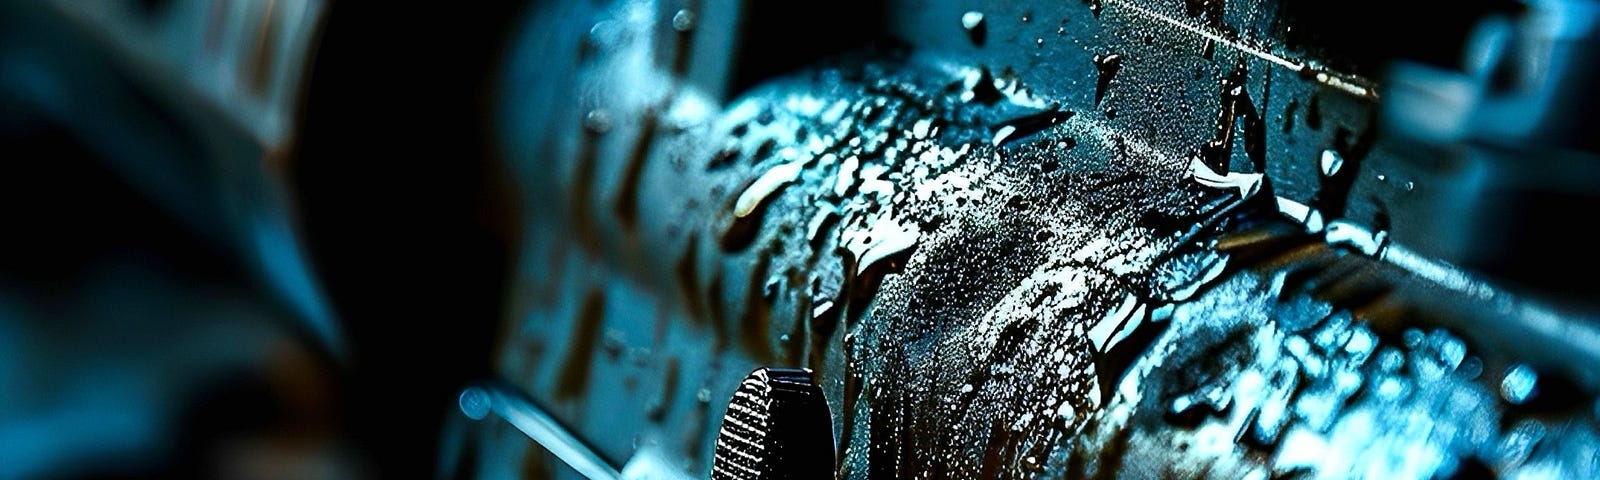 A close-up photo capturing the intricate details of a wet and dirty AR-15 rifle with droplets of water and mud on its metallic surface, highlighting the textures and contours of the firearm against a blurred background